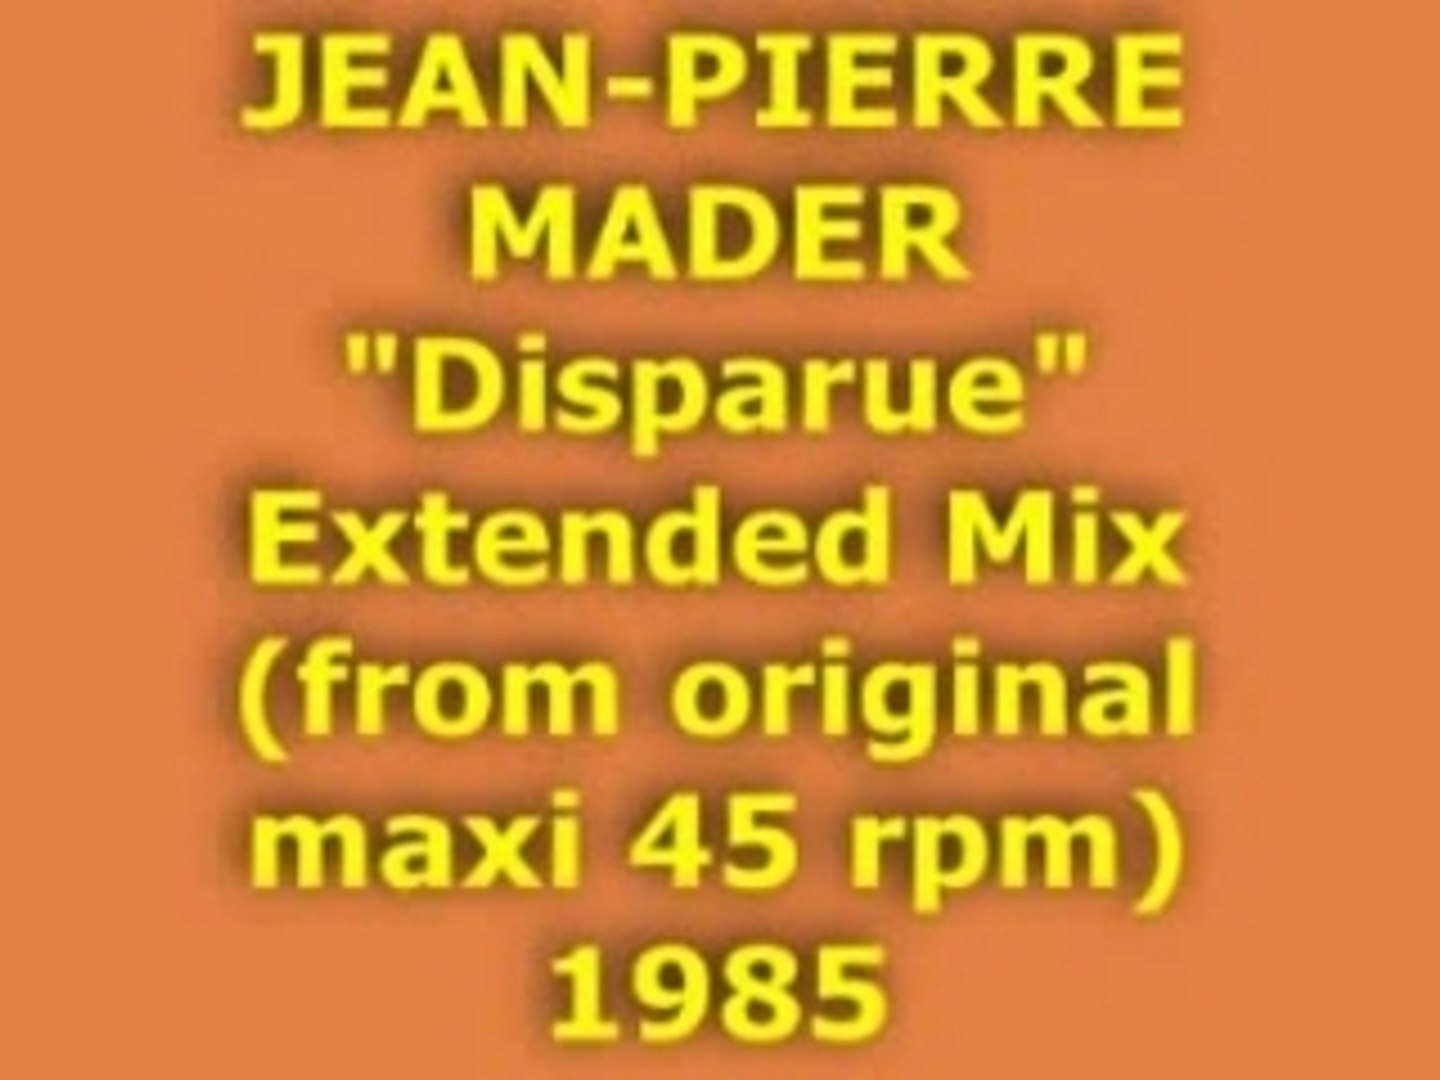 JEAN-PIERRE MADER "Disparue" Extended Mix 1985 - Vidéo Dailymotion